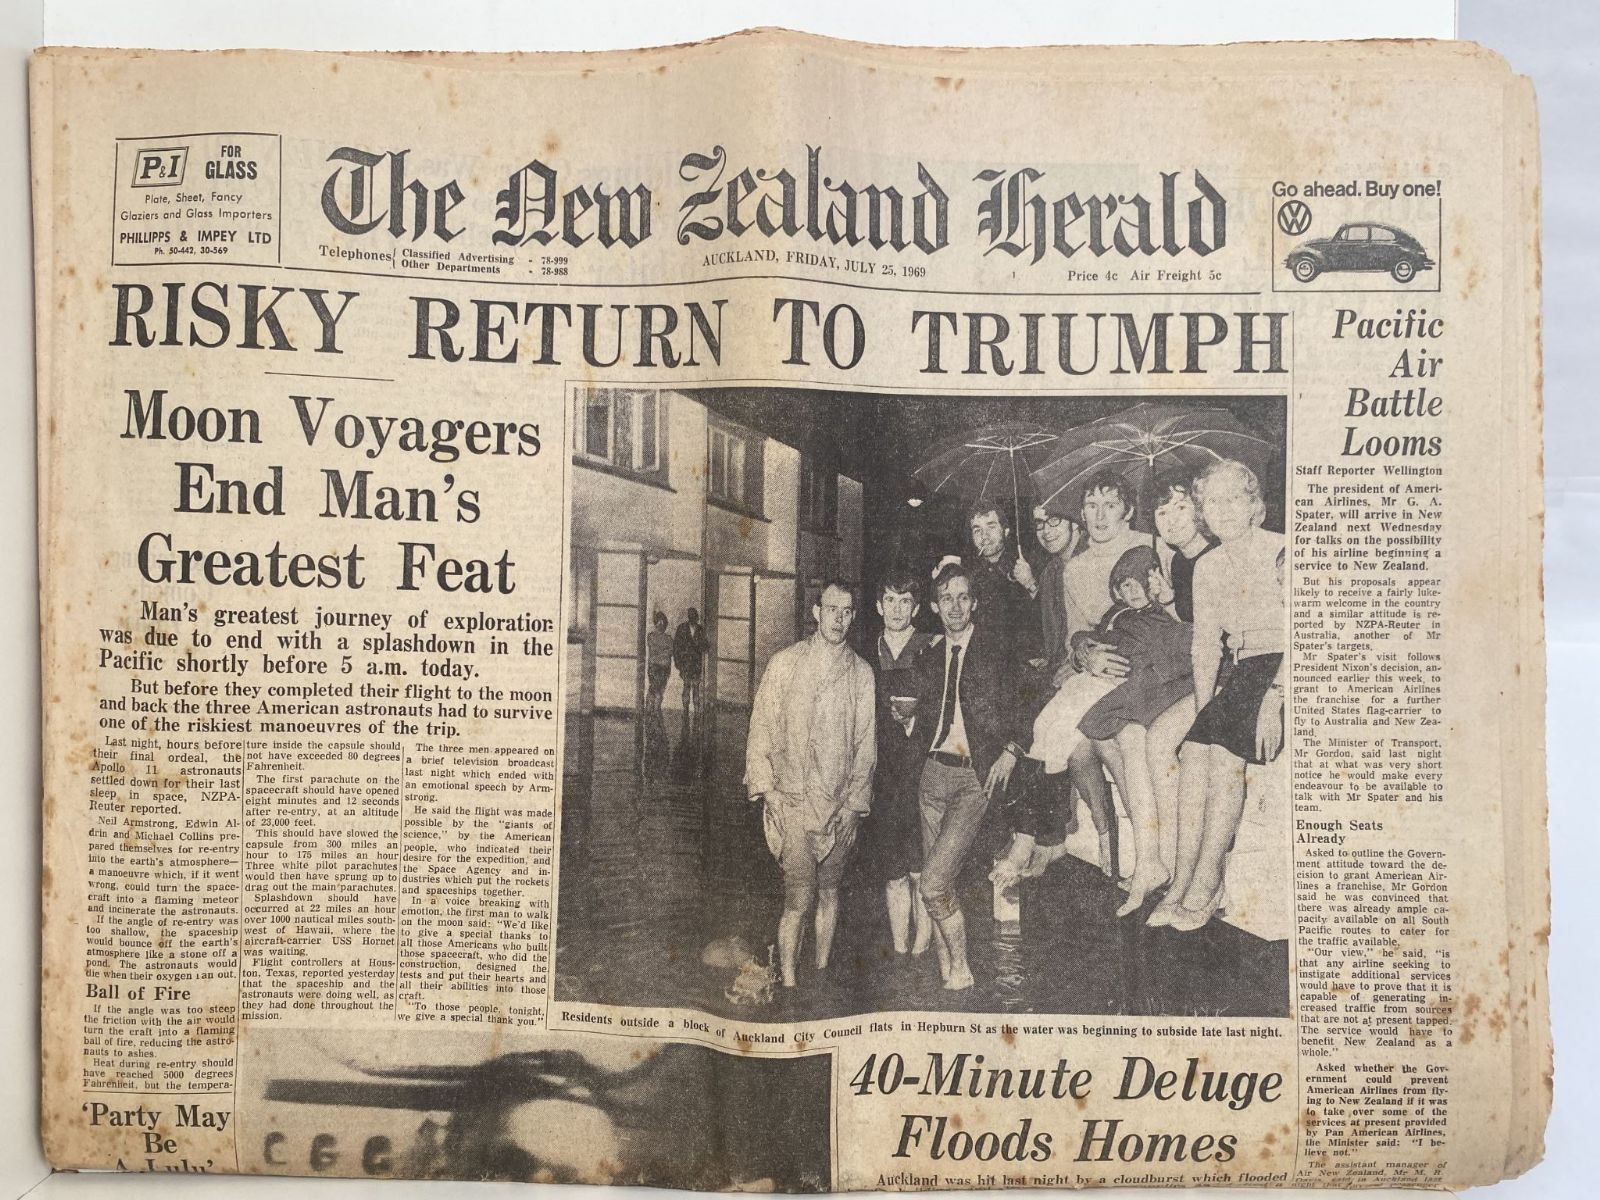 OLD NEWSPAPER : The New Zealand Herald, July 25th 1969 - Moon Landing Special